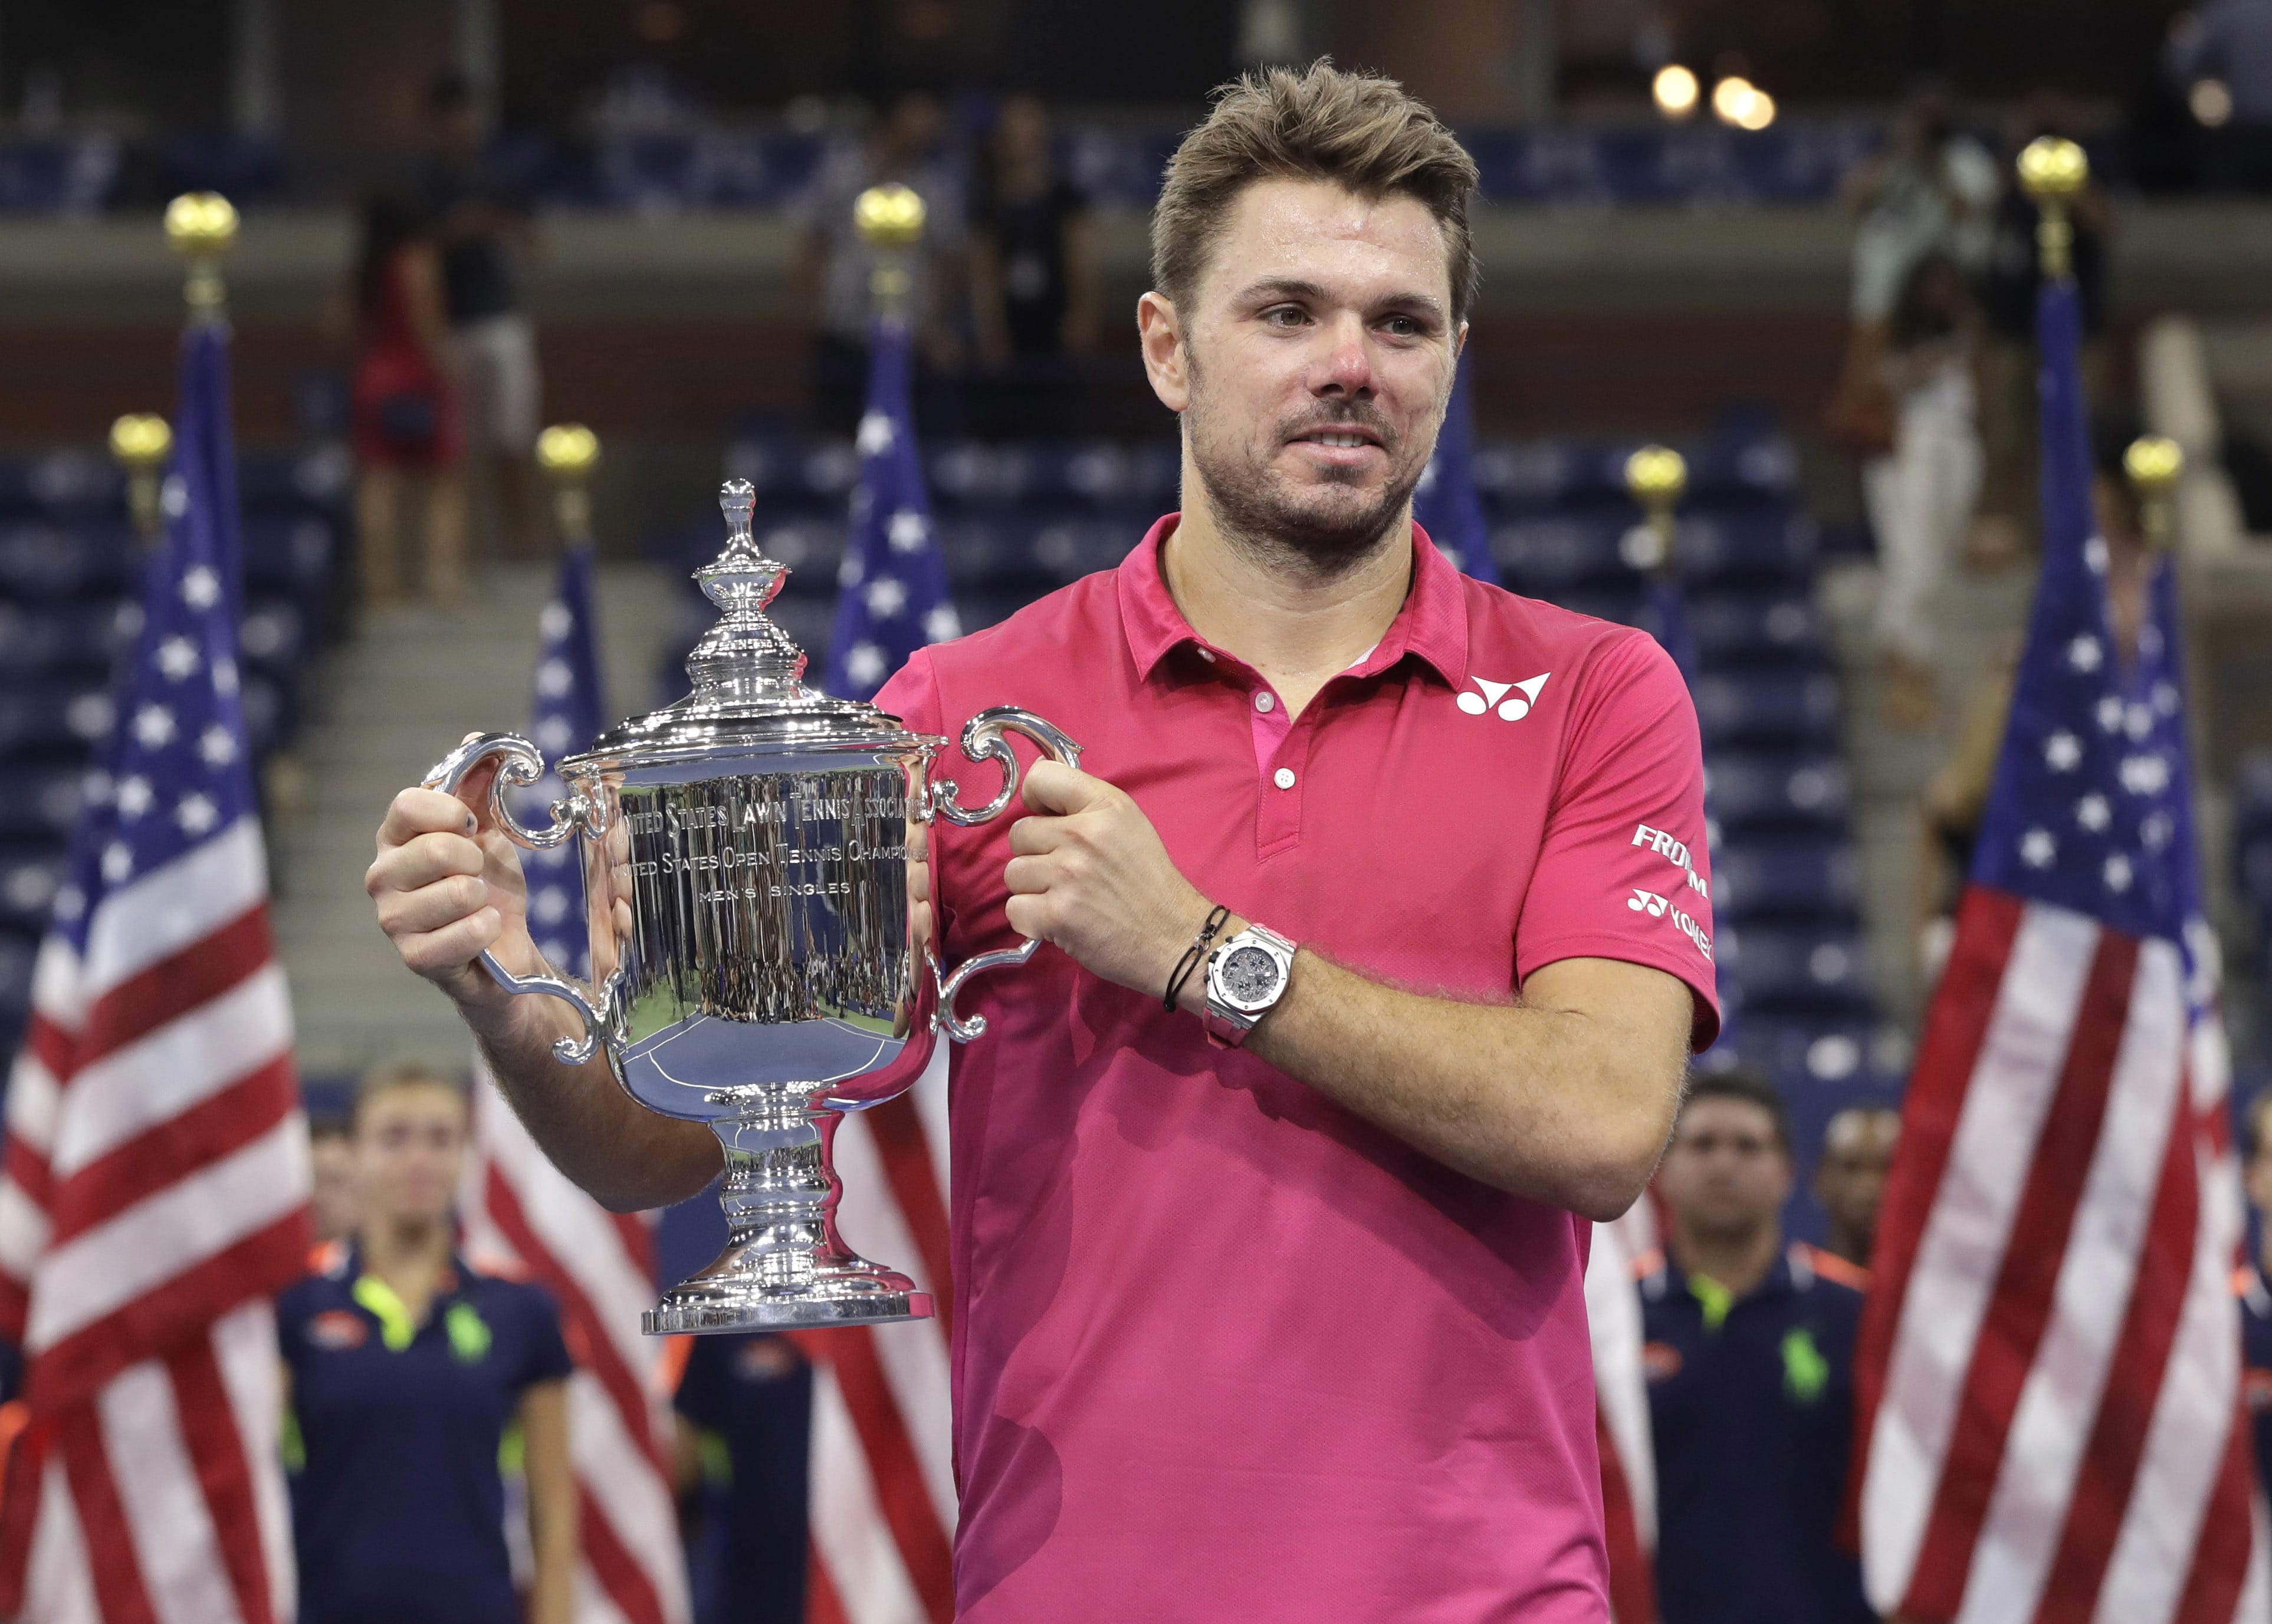 Stan Wawrinka, of Switzerland, holds up the championship trophy after beating Novak Djokovic, of Serbia, to win the men's singles final of the U.S. Open tennis tournament, Sunday, Sept. 11, 2016, in New York.